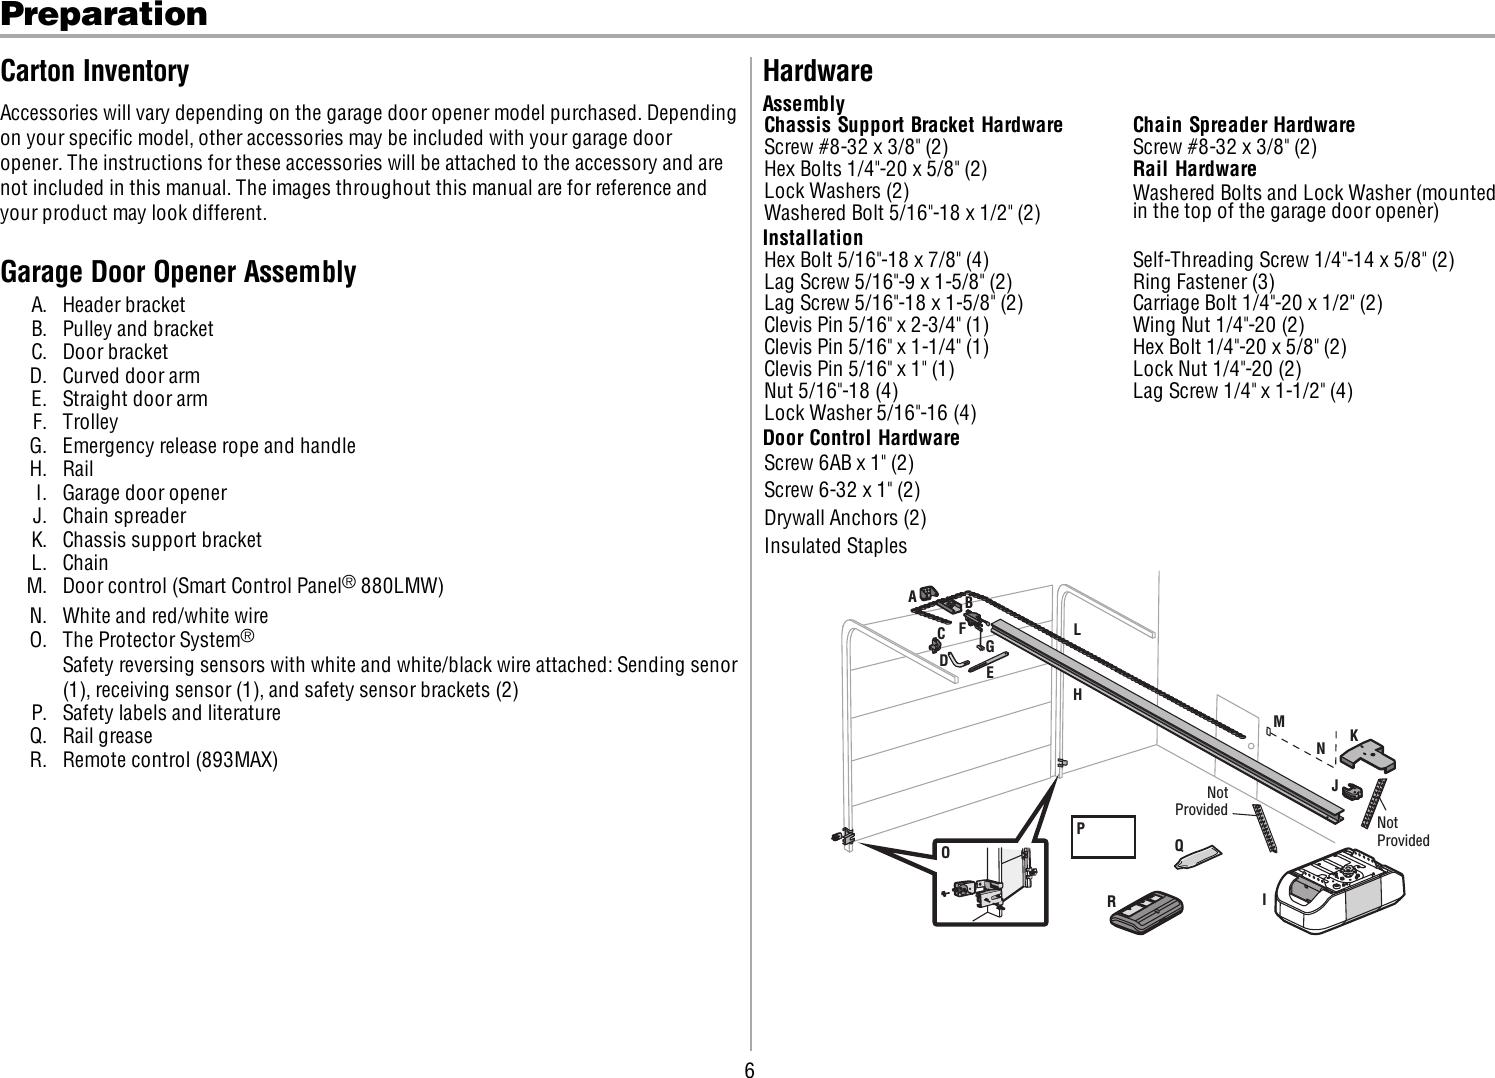 6PreparationCarton InventoryAccessories will vary depending on the garage door opener model purchased. Dependingon your specific model, other accessories may be included with your garage dooropener. The instructions for these accessories will be attached to the accessory and arenot included in this manual. The images throughout this manual are for reference andyour product may look different.Garage Door Opener AssemblyA. Header bracketB. Pulley and bracketC. Door bracketD. Curved door armE. Straight door armF. TrolleyG. Emergency release rope and handleH. RailI. Garage door openerJ. Chain spreaderK. Chassis support bracketL. ChainM. Door control (Smart Control Panel®880LMW)N. White and red/white wireO. The Protector System®Safety reversing sensors with white and white/black wire attached: Sending senor(1), receiving sensor (1), and safety sensor brackets (2)P. Safety labels and literatureQ. Rail greaseR. Remote control (893MAX)HardwareAssemblyChassis Support Bracket Hardware Chain Spreader HardwareScrew #8-32 x 3/8&quot; (2) Screw #8-32 x 3/8&quot; (2)Hex Bolts 1/4&quot;-20 x 5/8&quot; (2) Rail HardwareLock Washers (2) Washered Bolts and Lock Washer (mountedin the top of the garage door opener)Washered Bolt 5/16&quot;-18 x 1/2&quot; (2)InstallationHex Bolt 5/16&quot;-18 x 7/8&quot; (4) Self-Threading Screw 1/4&quot;-14 x 5/8&quot; (2)Lag Screw 5/16&quot;-9 x 1-5/8&quot; (2) Ring Fastener (3)Lag Screw 5/16&quot;-18 x 1-5/8&quot; (2) Carriage Bolt 1/4&quot;-20 x 1/2&quot; (2)Clevis Pin 5/16&quot; x 2-3/4&quot; (1) Wing Nut 1/4&quot;-20 (2)Clevis Pin 5/16&quot; x 1-1/4&quot; (1) Hex Bolt 1/4&quot;-20 x 5/8&quot; (2)Clevis Pin 5/16&quot; x 1&quot; (1) Lock Nut 1/4&quot;-20 (2)Nut 5/16&quot;-18 (4) Lag Screw 1/4&quot; x 1-1/2&quot; (4)Lock Washer 5/16&quot;-16 (4)Door Control HardwareScrew 6AB x 1&quot; (2)Screw 6-32 x 1&quot; (2)Drywall Anchors (2)Insulated StaplesABCKJIPDEFHGLMNQORNotProvided Not Provided